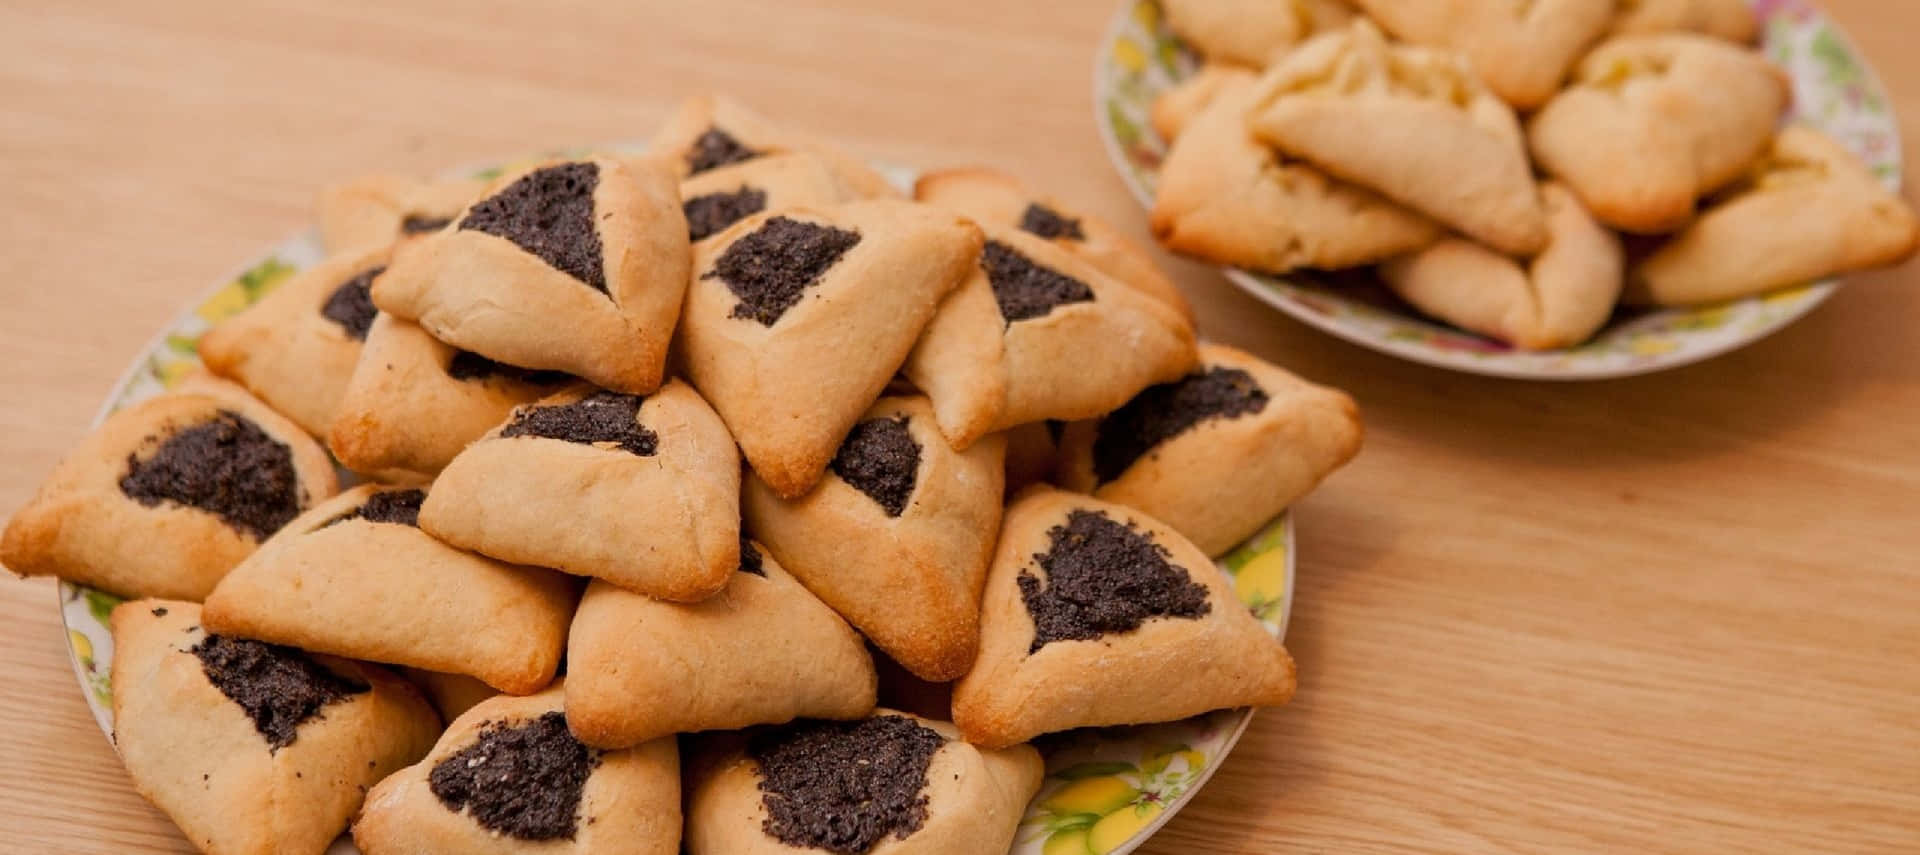 A Plate Of Hamantaschen With Black Filling